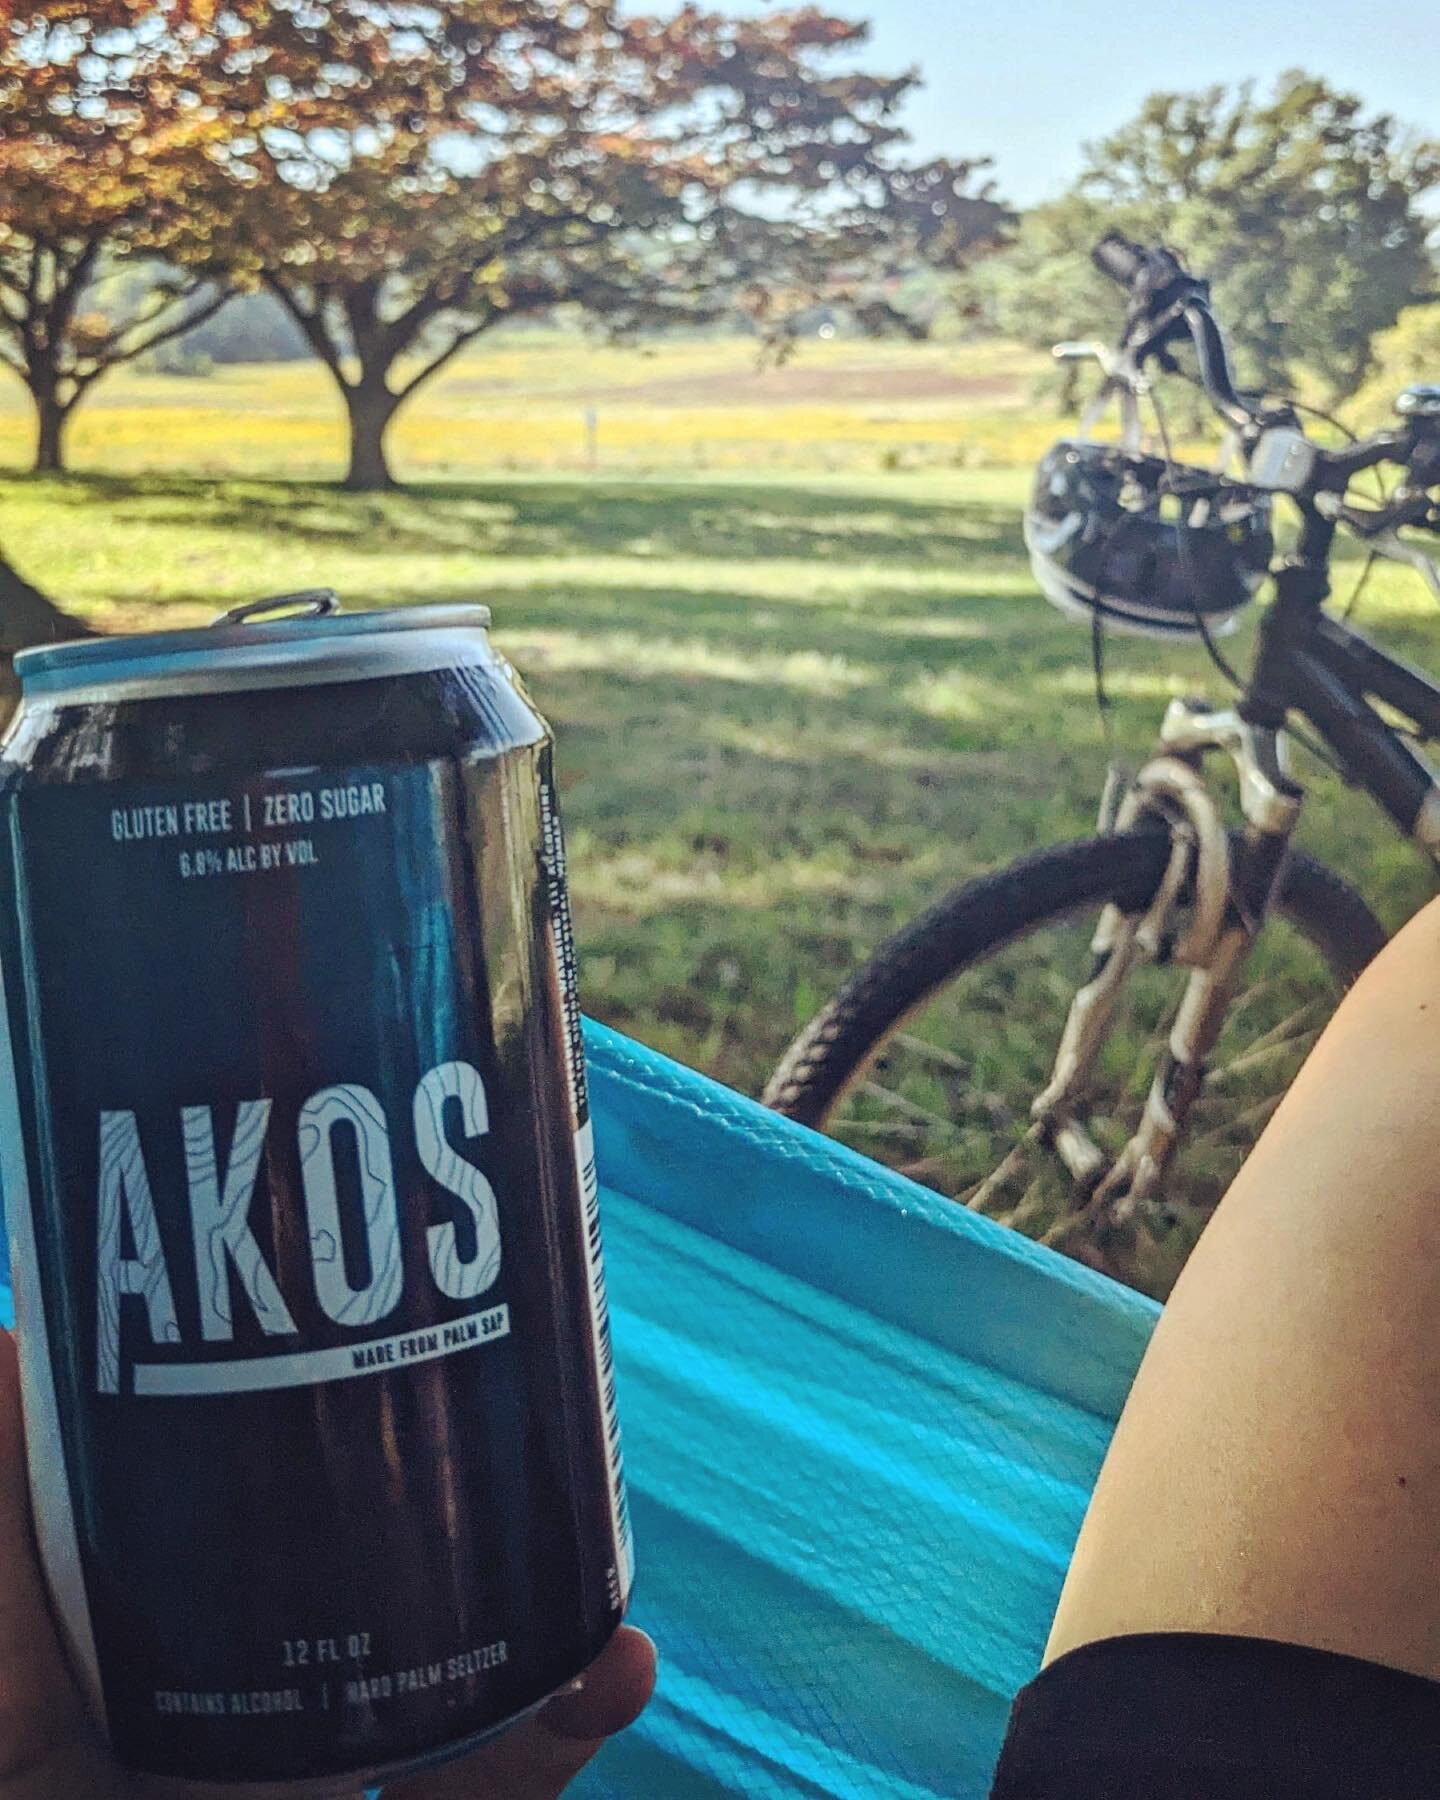 Falling for Akos? 🍂🎃
.
The natural amber color and crisp flavor of our palm sap seltzer pairs delightfully with 
.
Dead leaves 🍁
Dark evenings 🥀
Spooky weekends 👻
.
drinkakos.com/where-to-buy
.
#philadelphia #roadie #hardseltzer